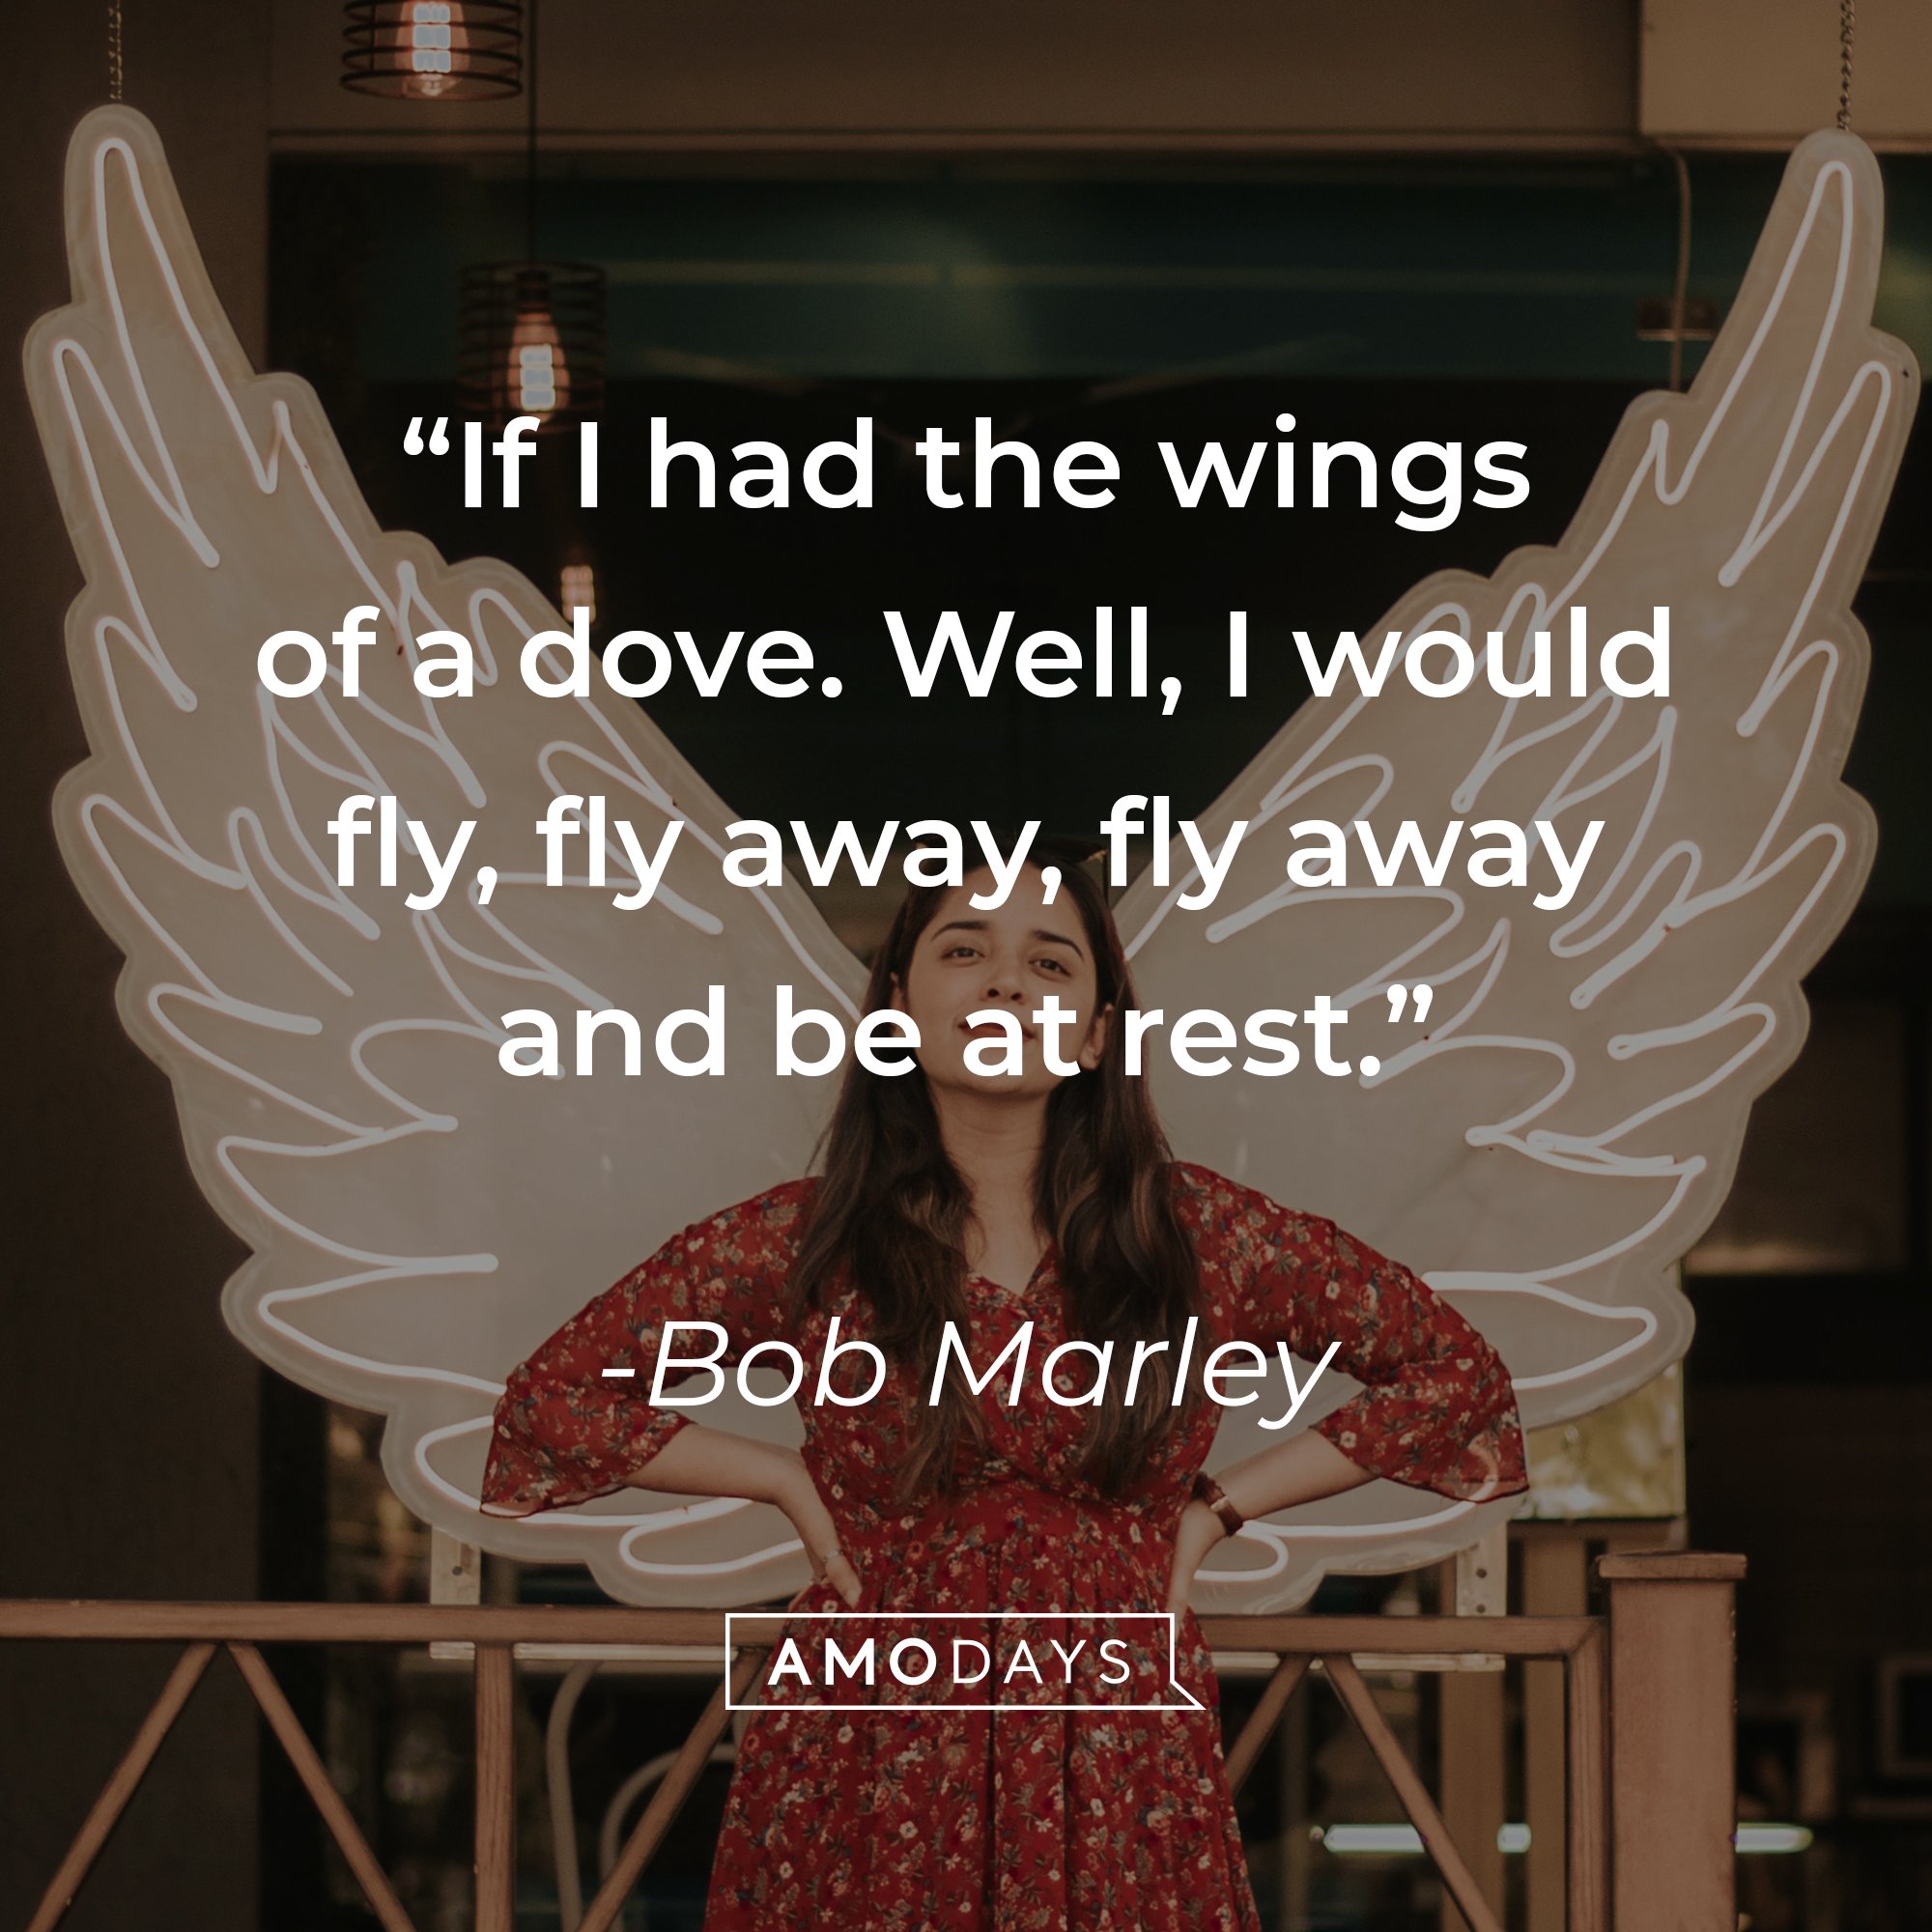 Bob Marley's quote: "If I had the wings of a dove. Well, I would fly, fly away, fly away and be at rest." | Image: AmoDays